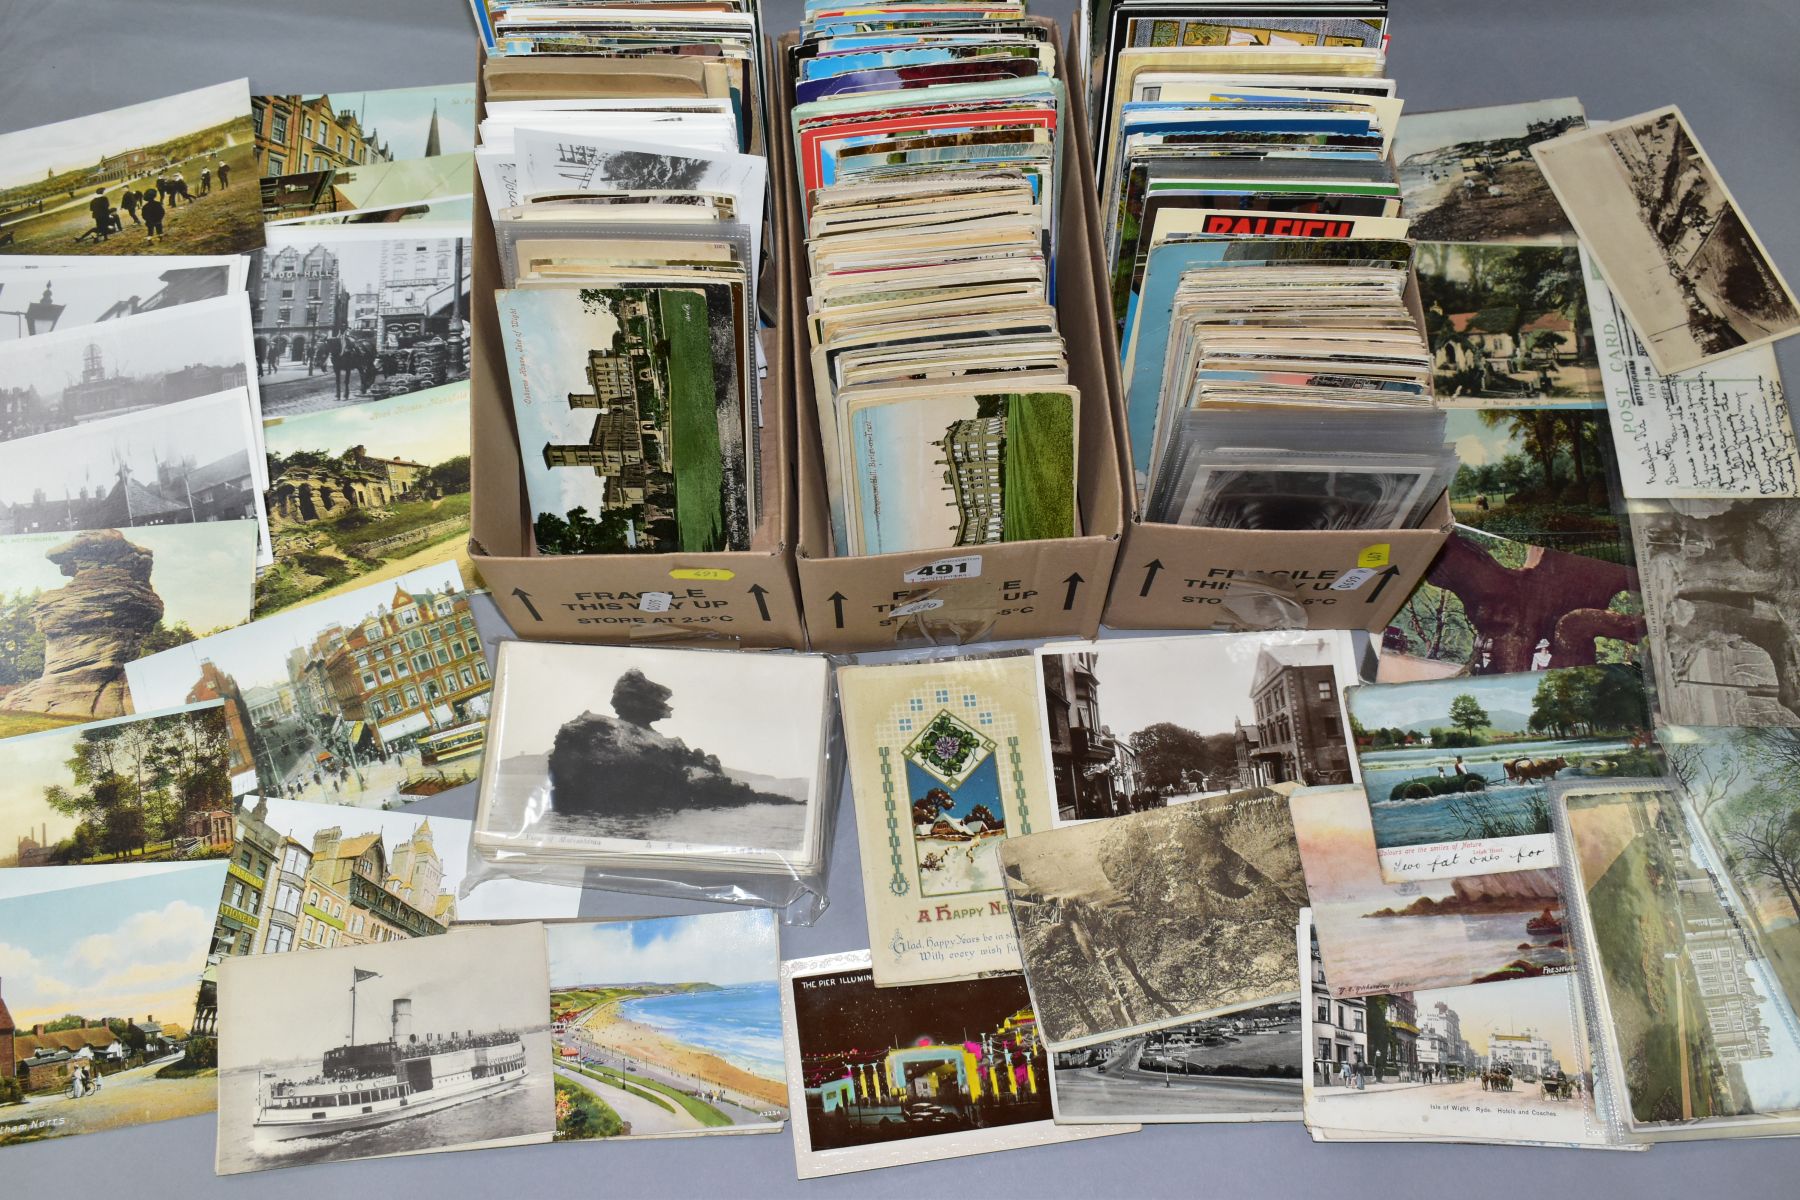 POSTCARDS, approximately 1300 - 1400 postcards in three boxes, box 1 contains a mixture of